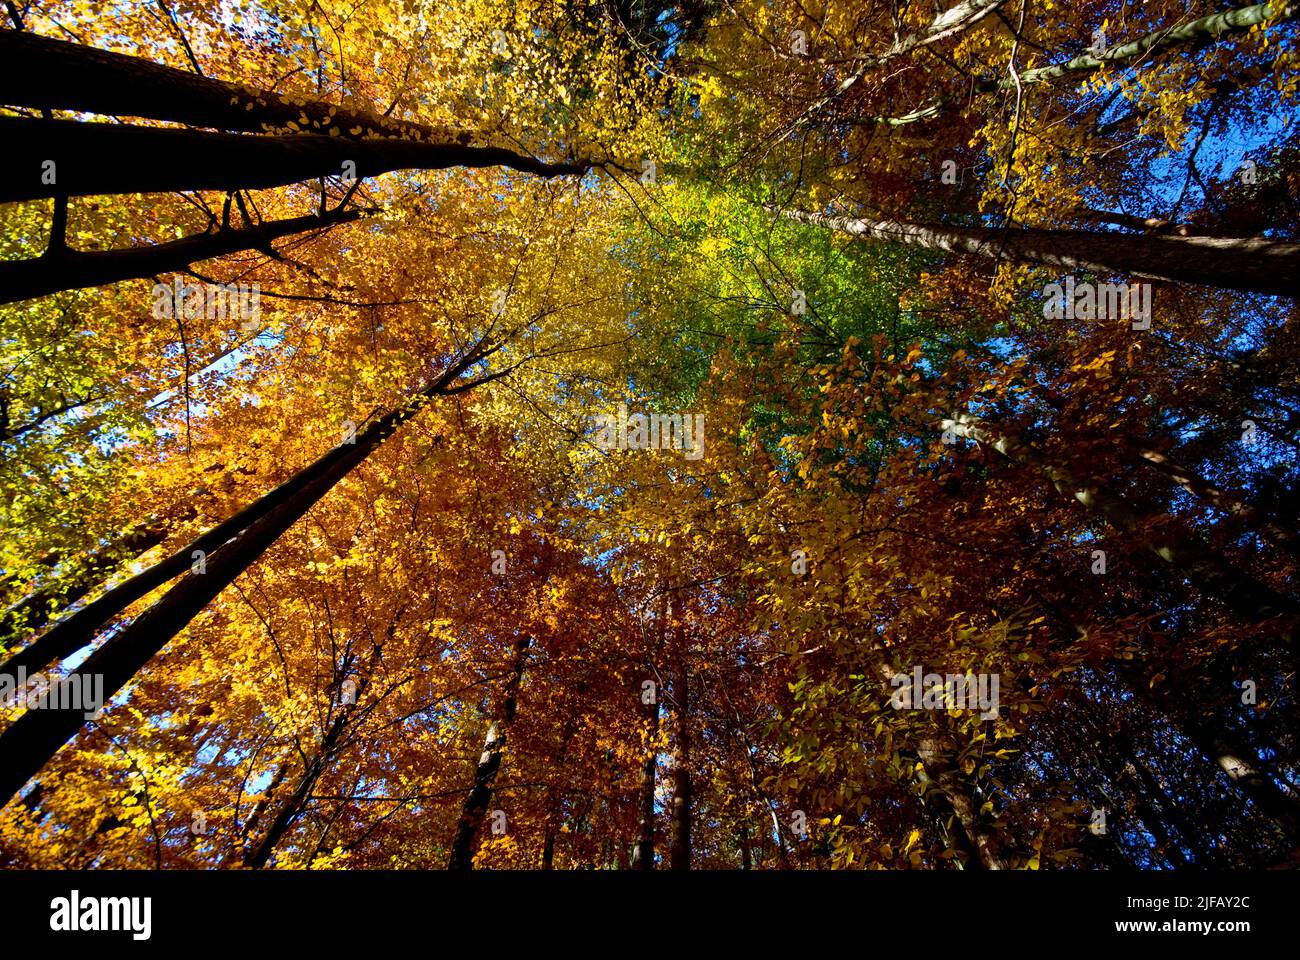 Autumn in a forest in southern Germany. Stock Photo